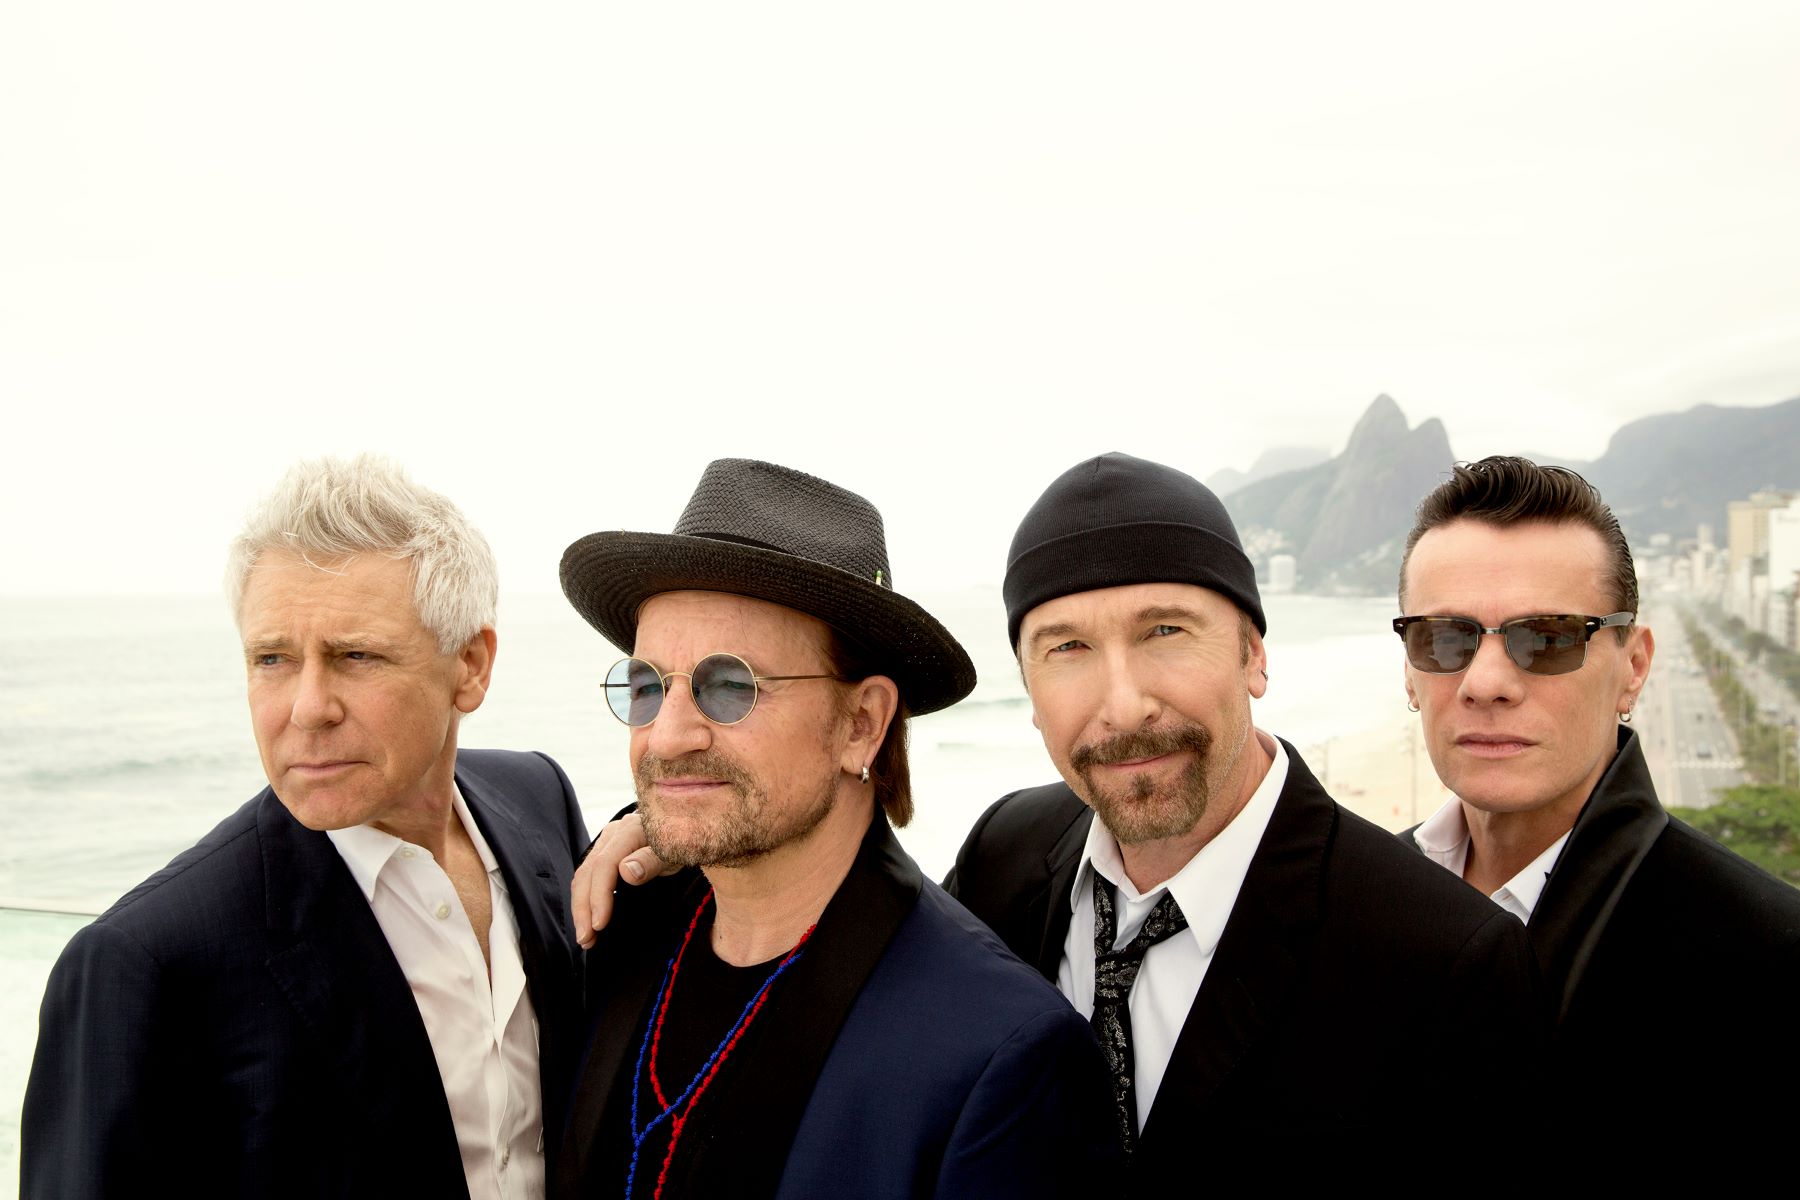 U2’s “With Or Without You”: A Heart-Wrenching Anthem Of Love And Longing